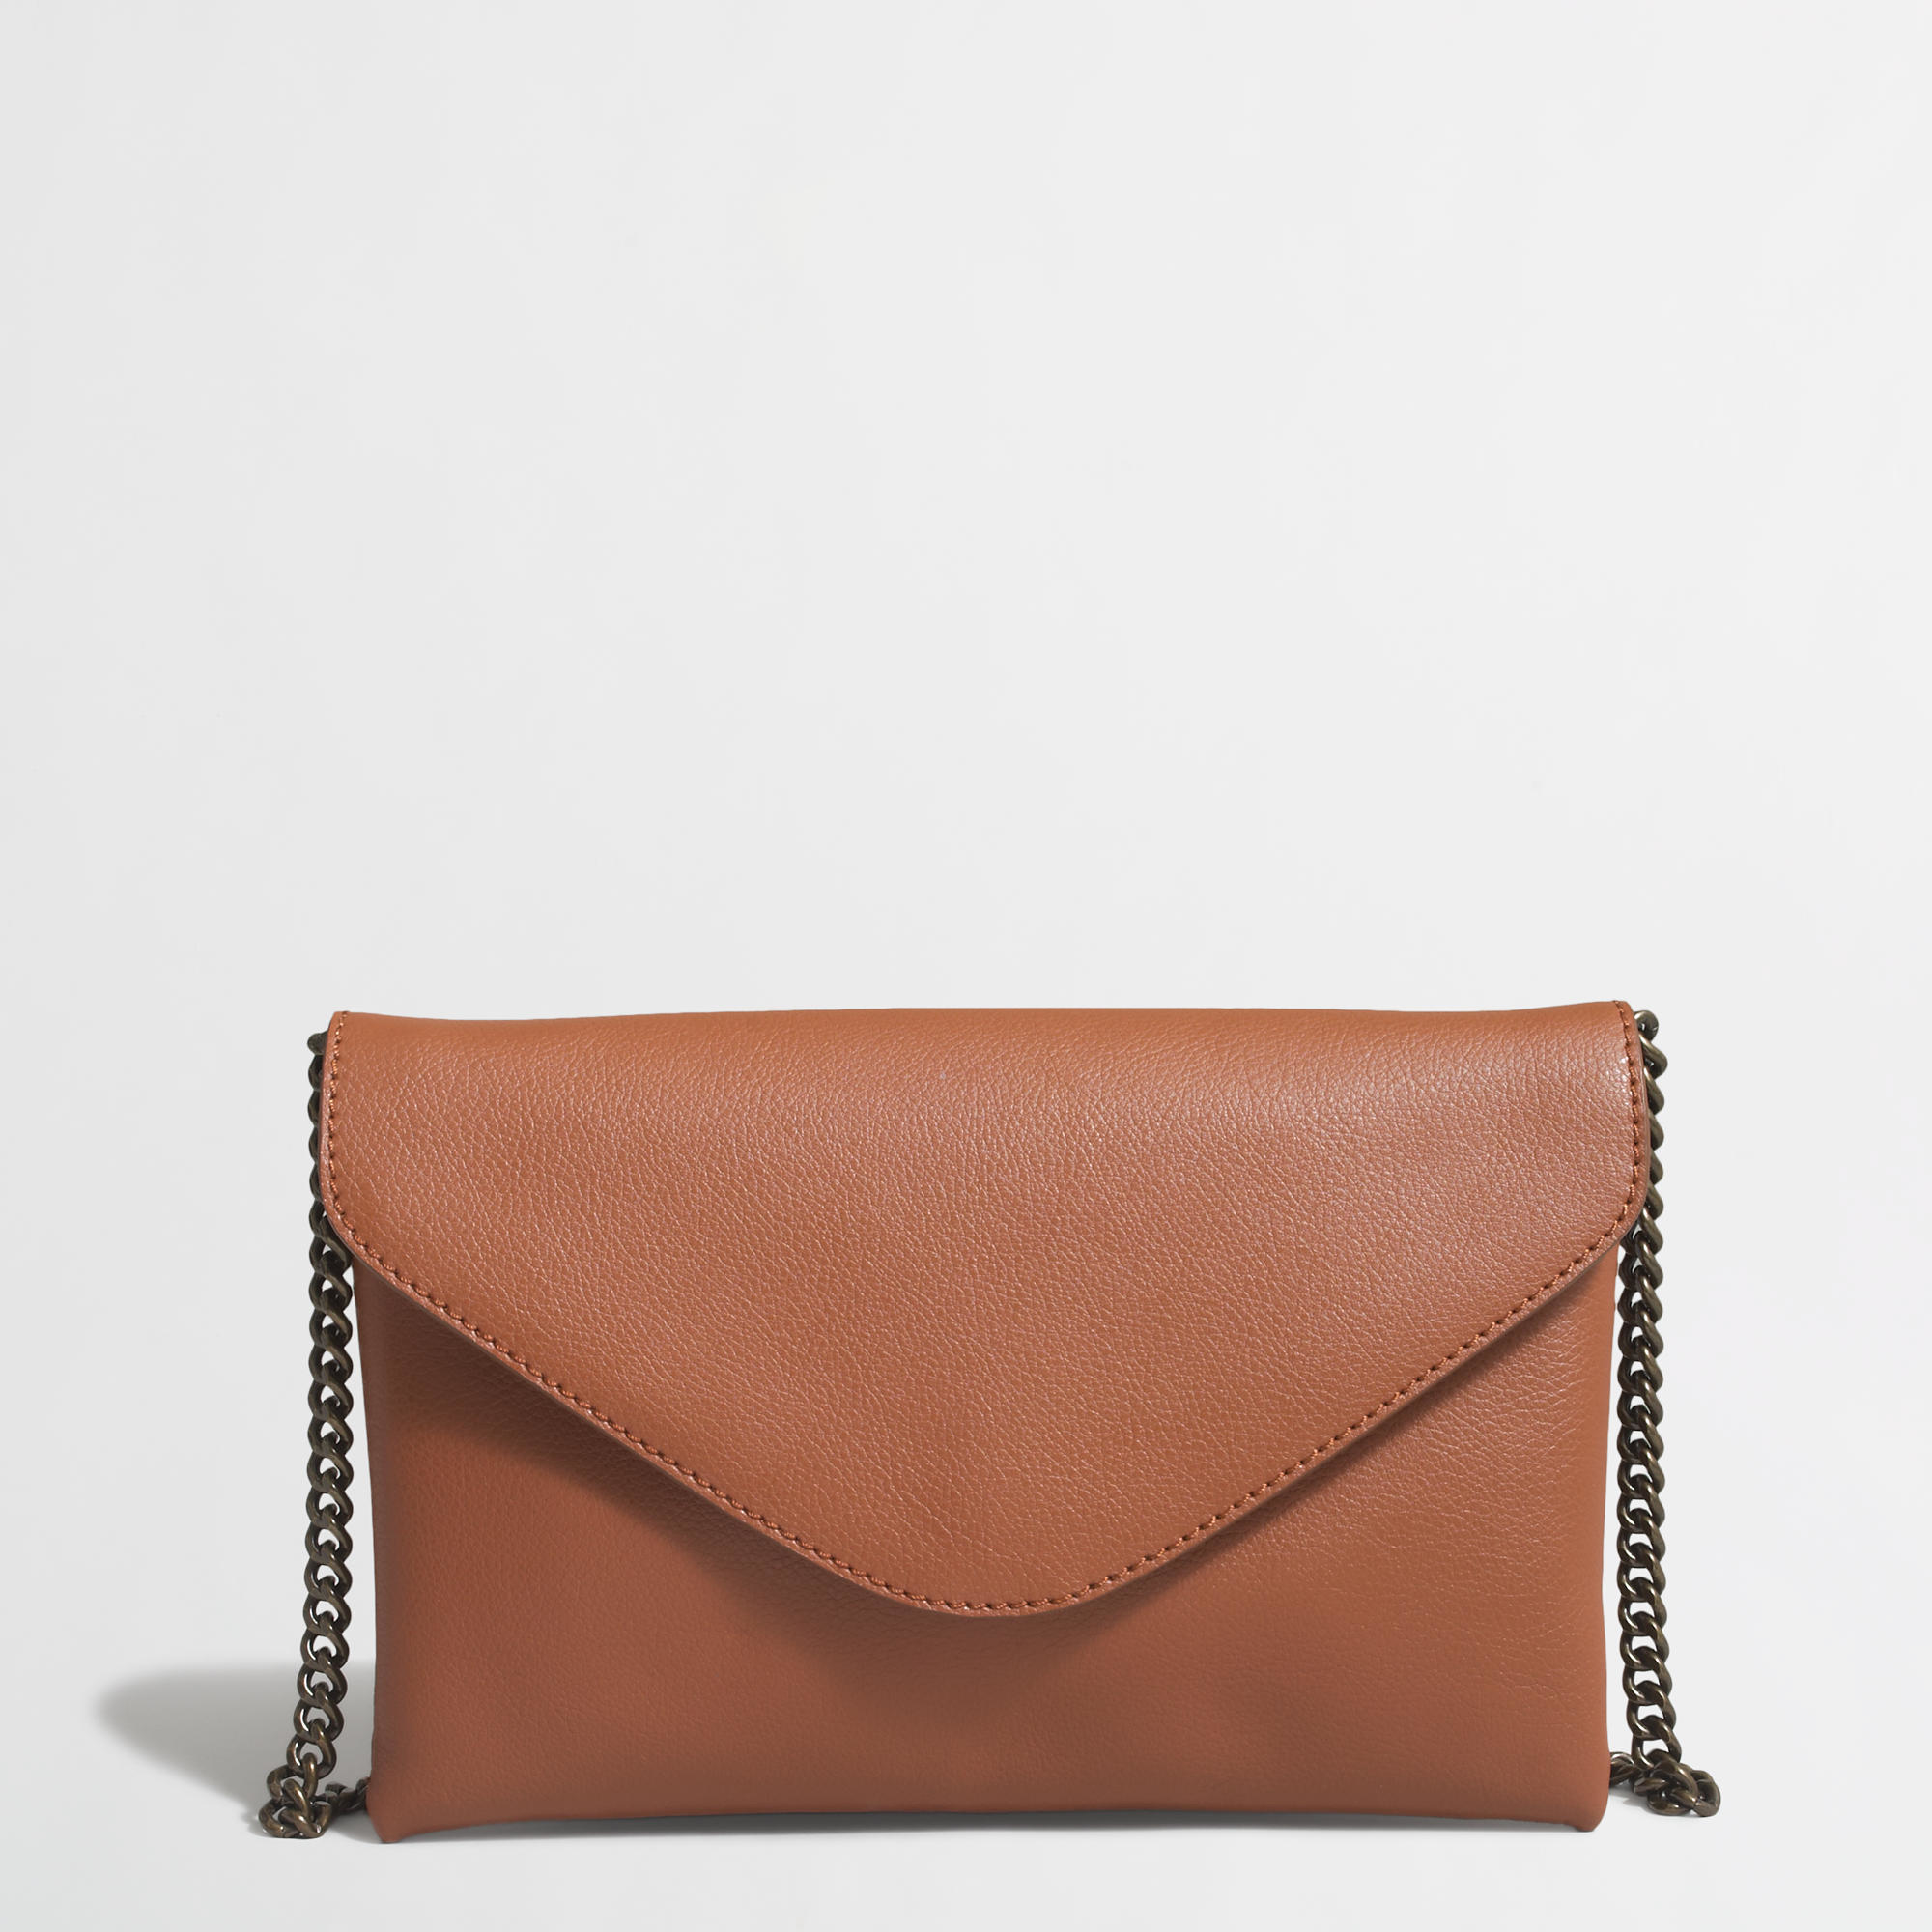 Lyst - J.Crew Factory Leather Envelope Clutch in Brown